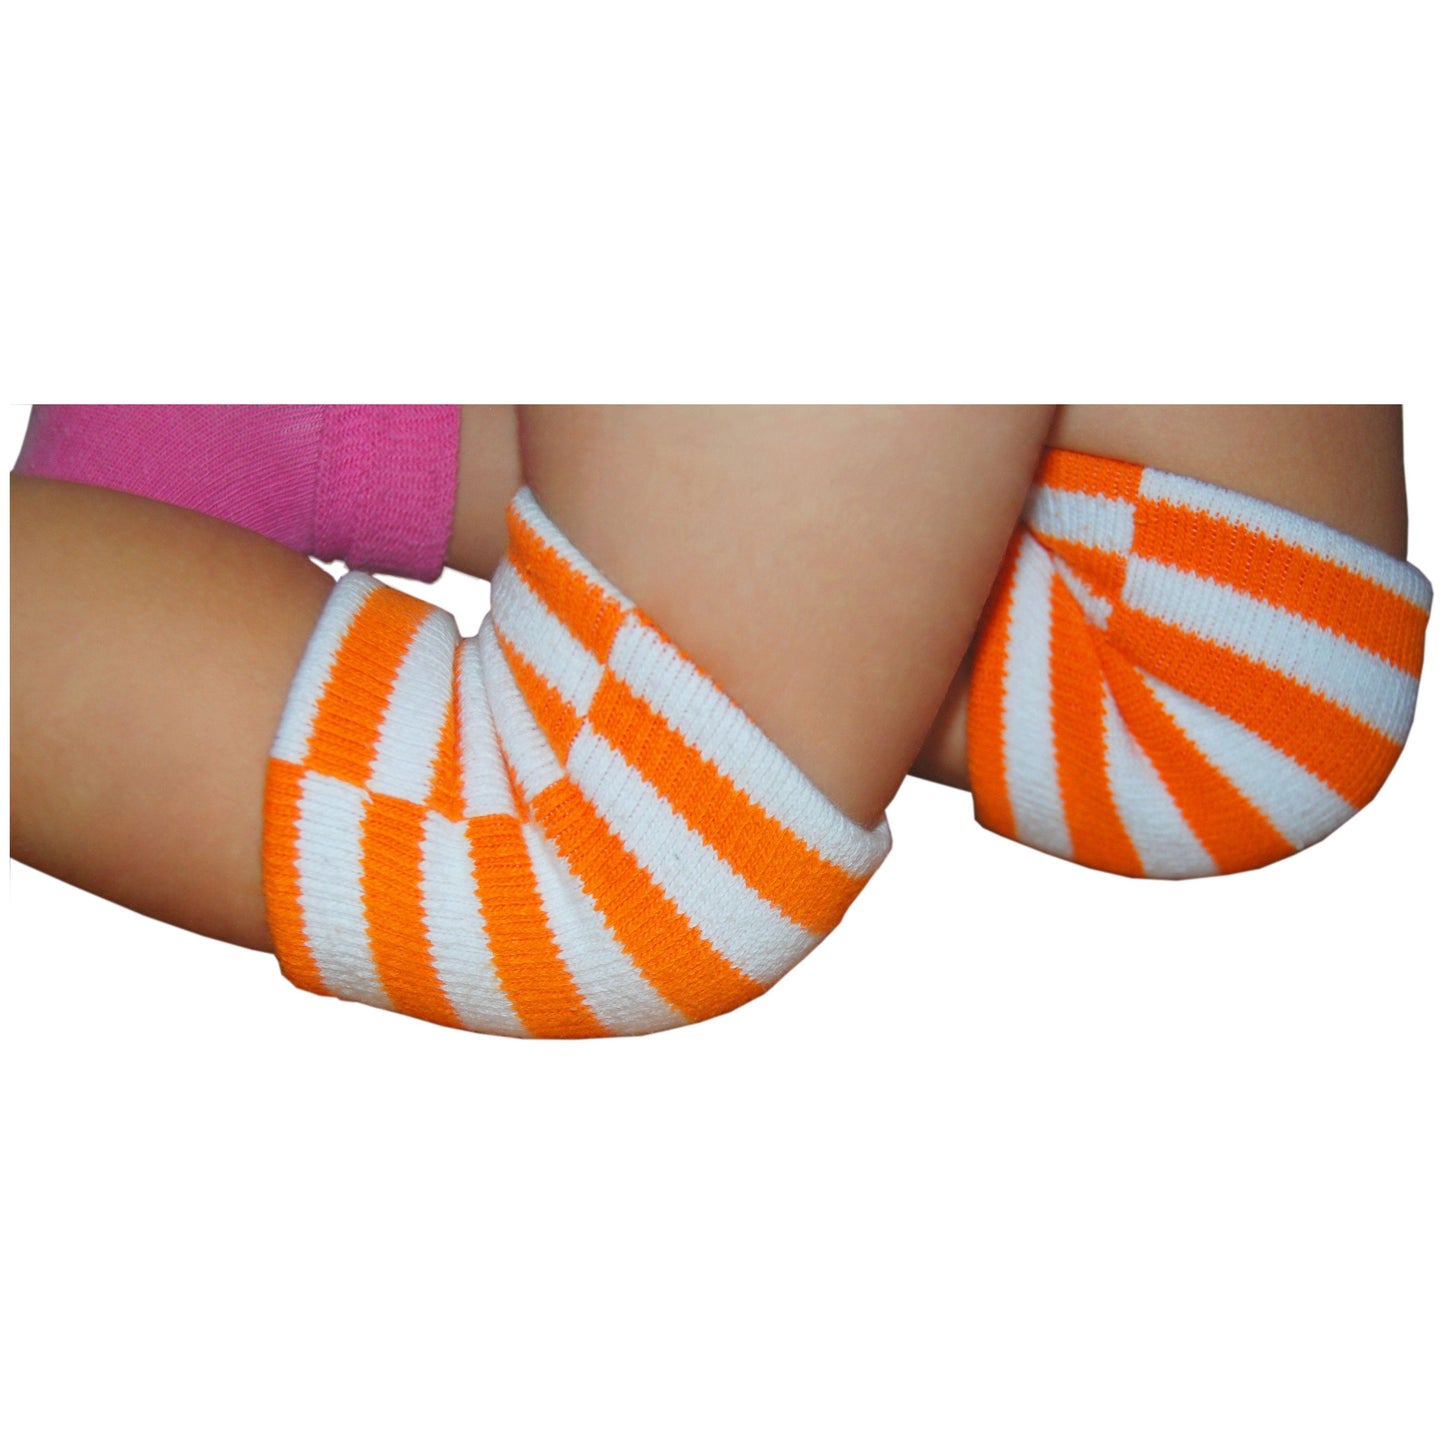 Soft Knee Pads / Knee Protectors. For Older Kids / Children. More Colors Available-Knee Pads-KneeBees